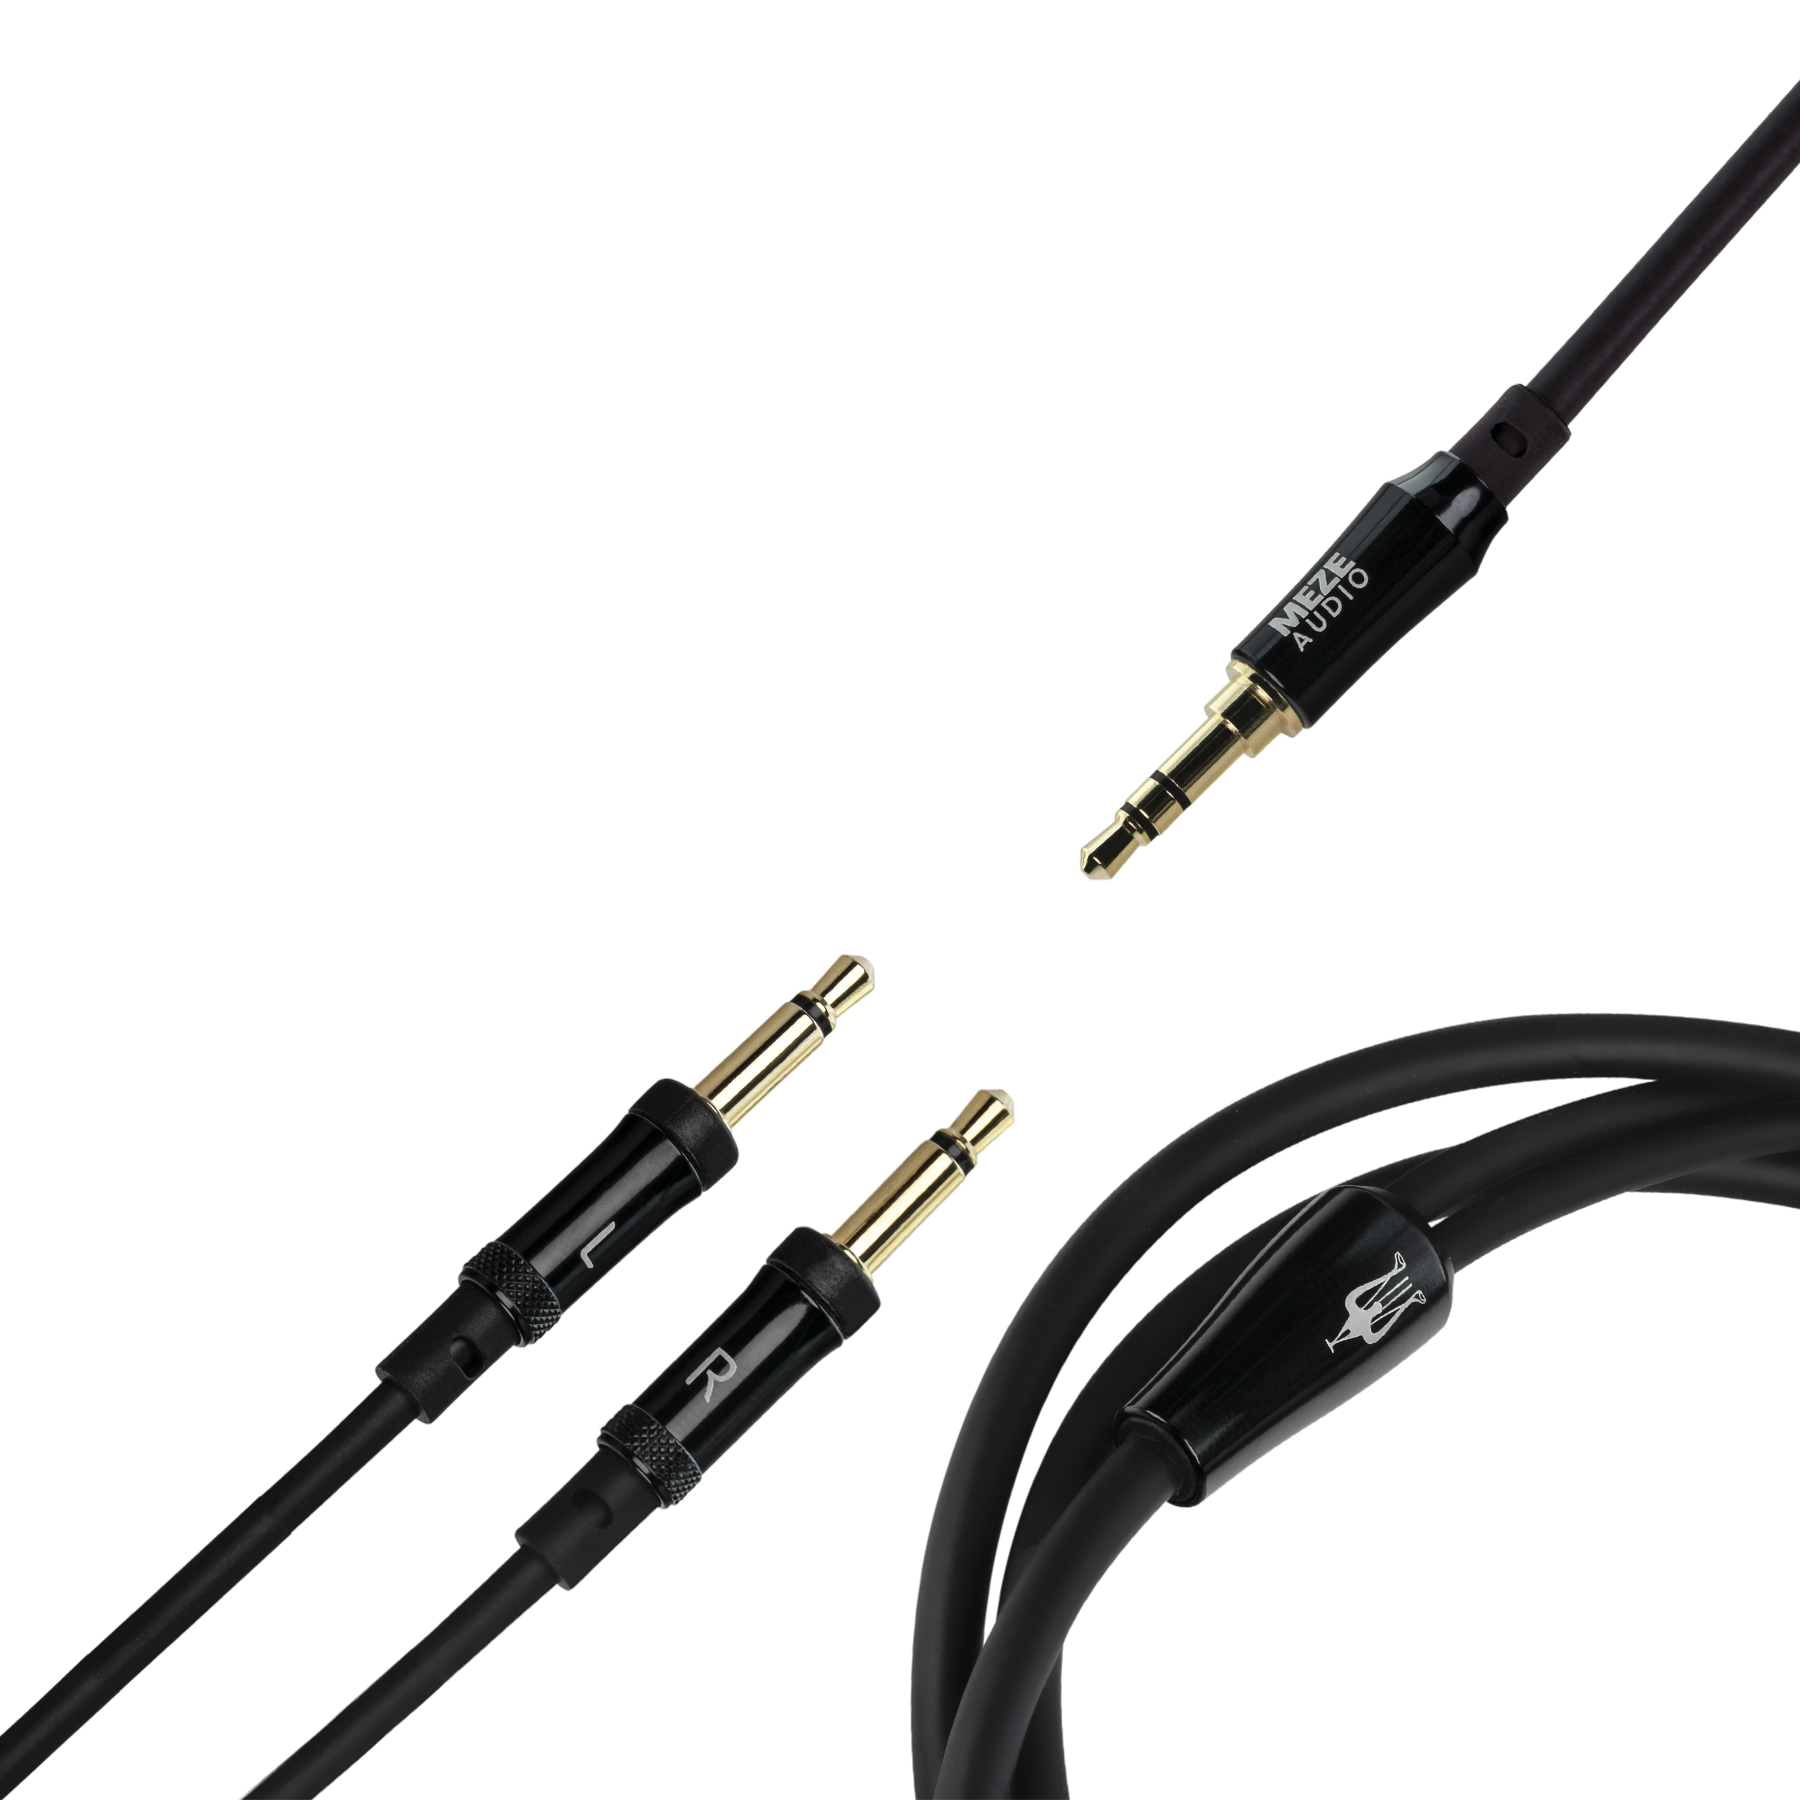 Meze Audio 3.5mm to 3.5mm Pro Standard Cable with Black Aluminum Casings